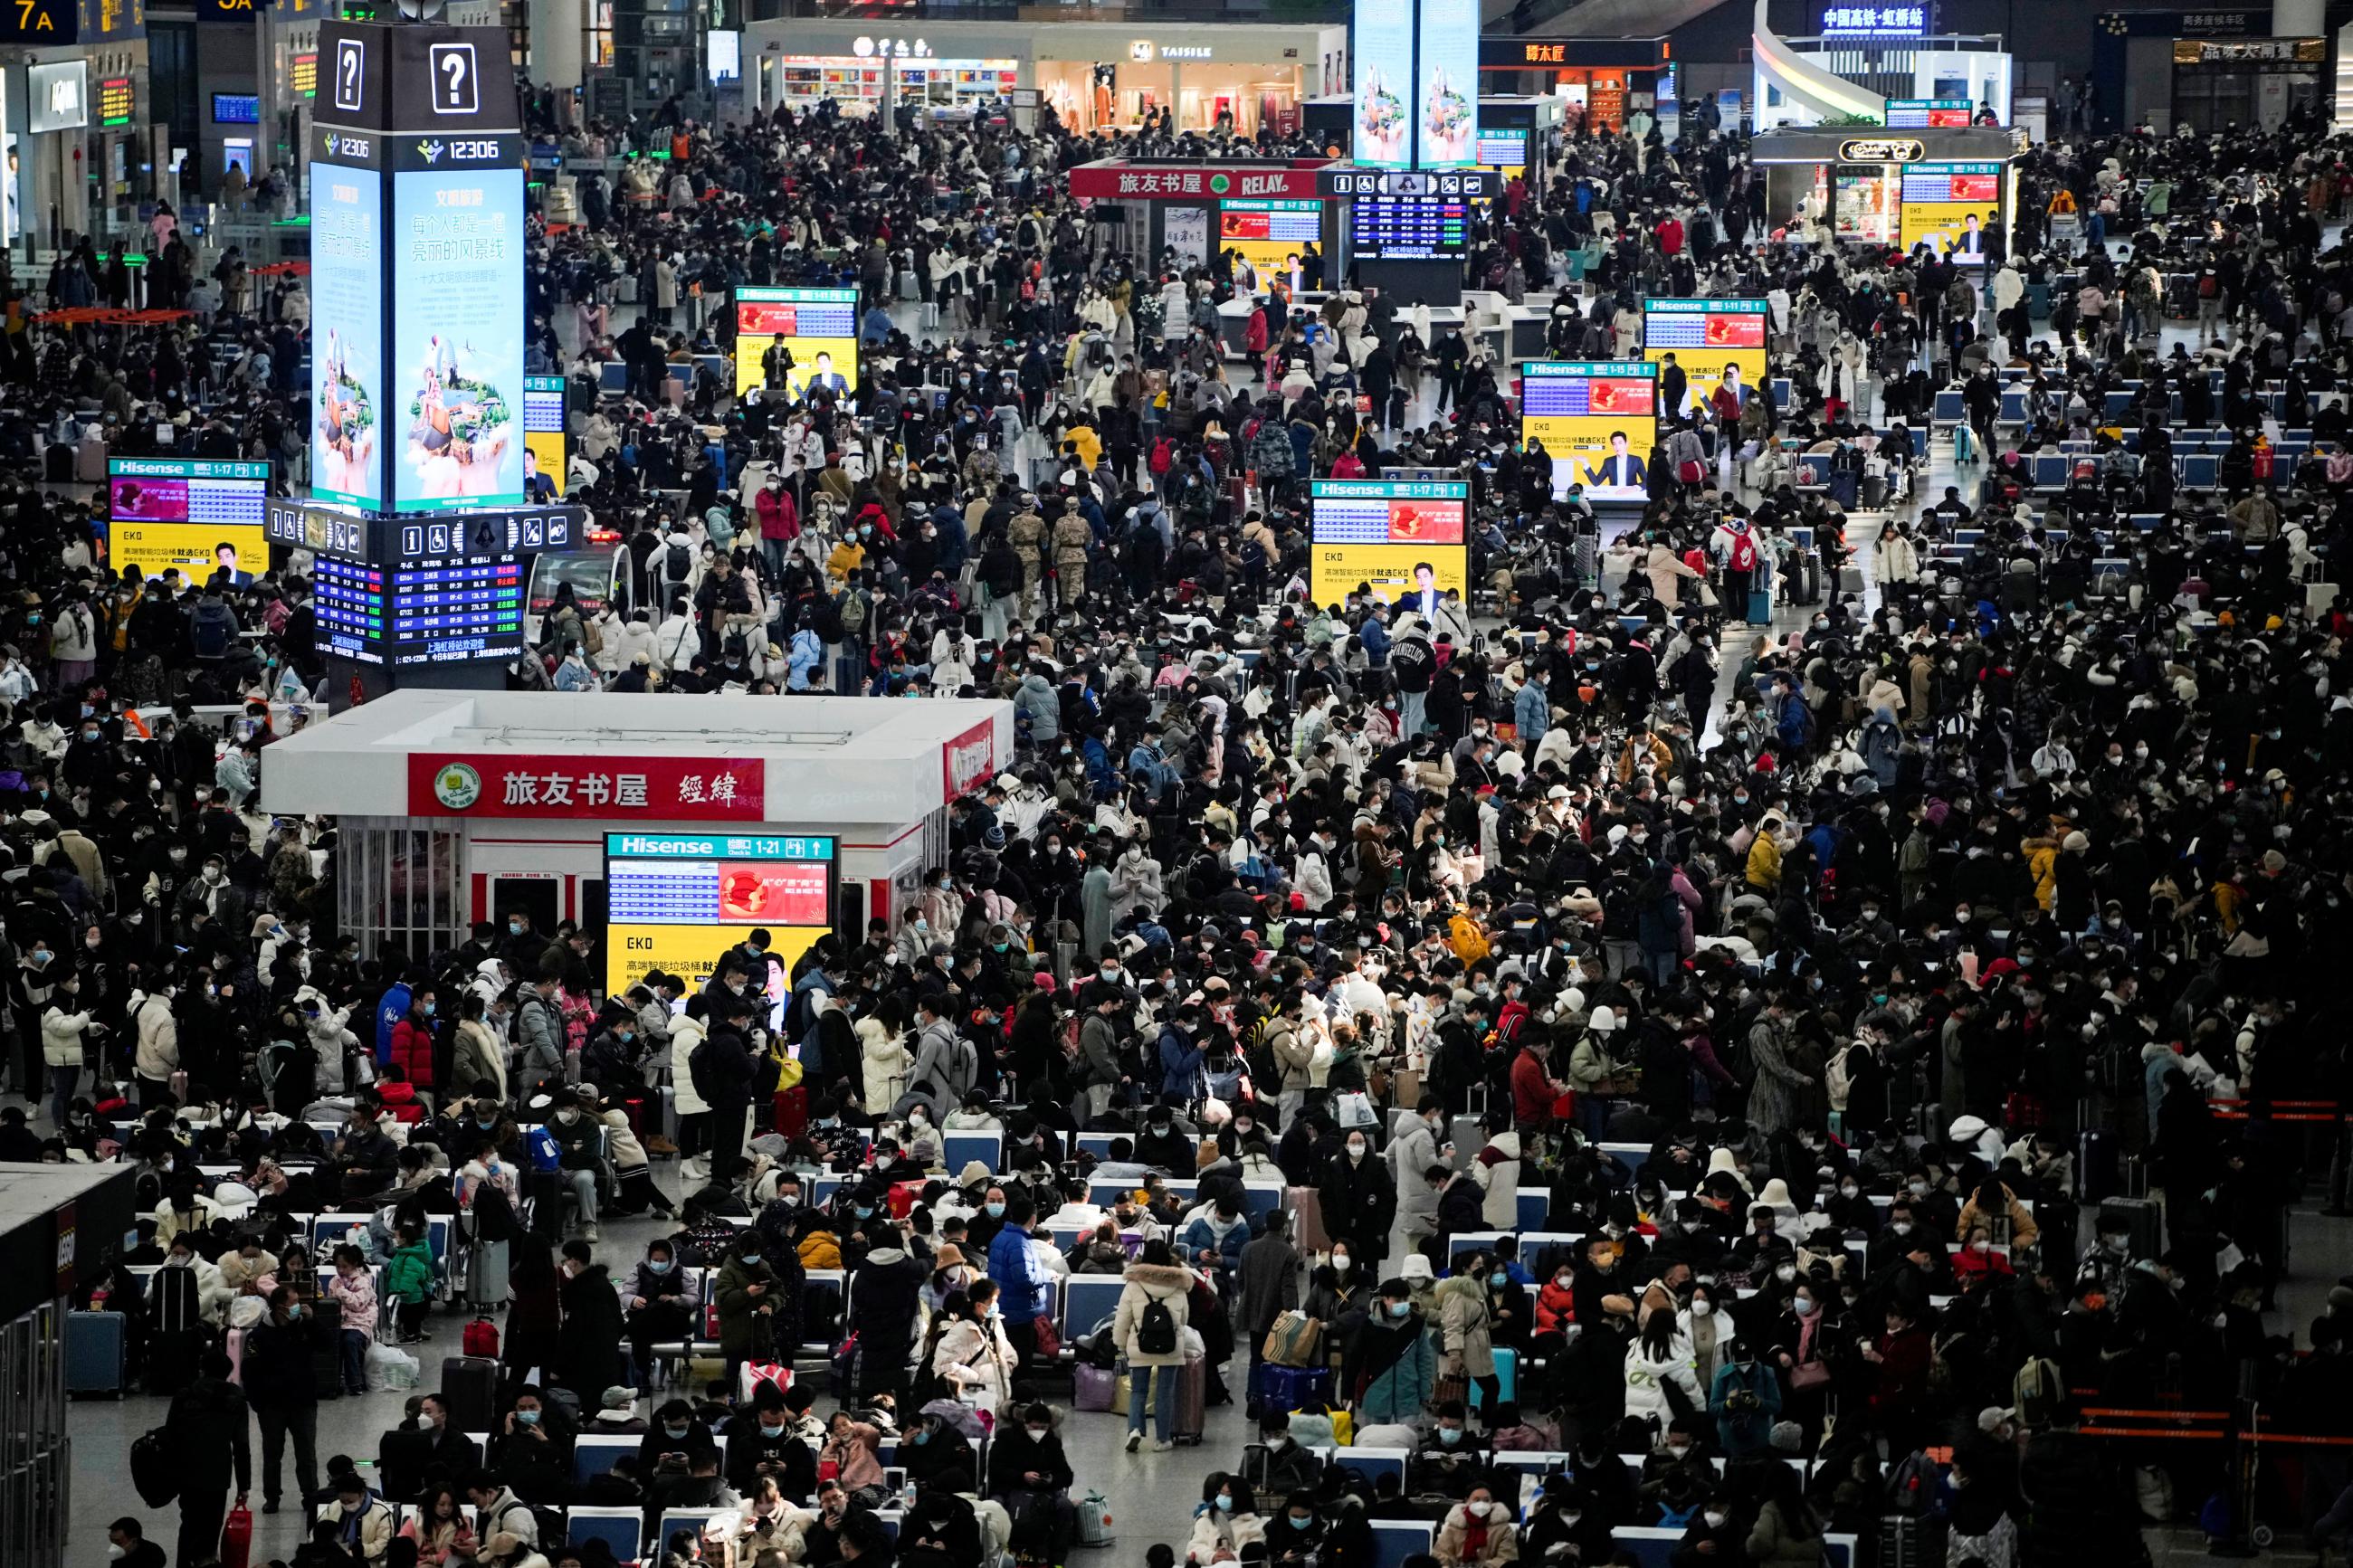 Passengers wait to board trains at Shanghai's Hongqiao Railway Station during the annual Spring Festival travel rush ahead of the Chinese Lunar New Year, as the coronavirus disease (COVID-19) outbreak continues, in Shanghai, China January 18, 2023. REUTERS/Aly Song